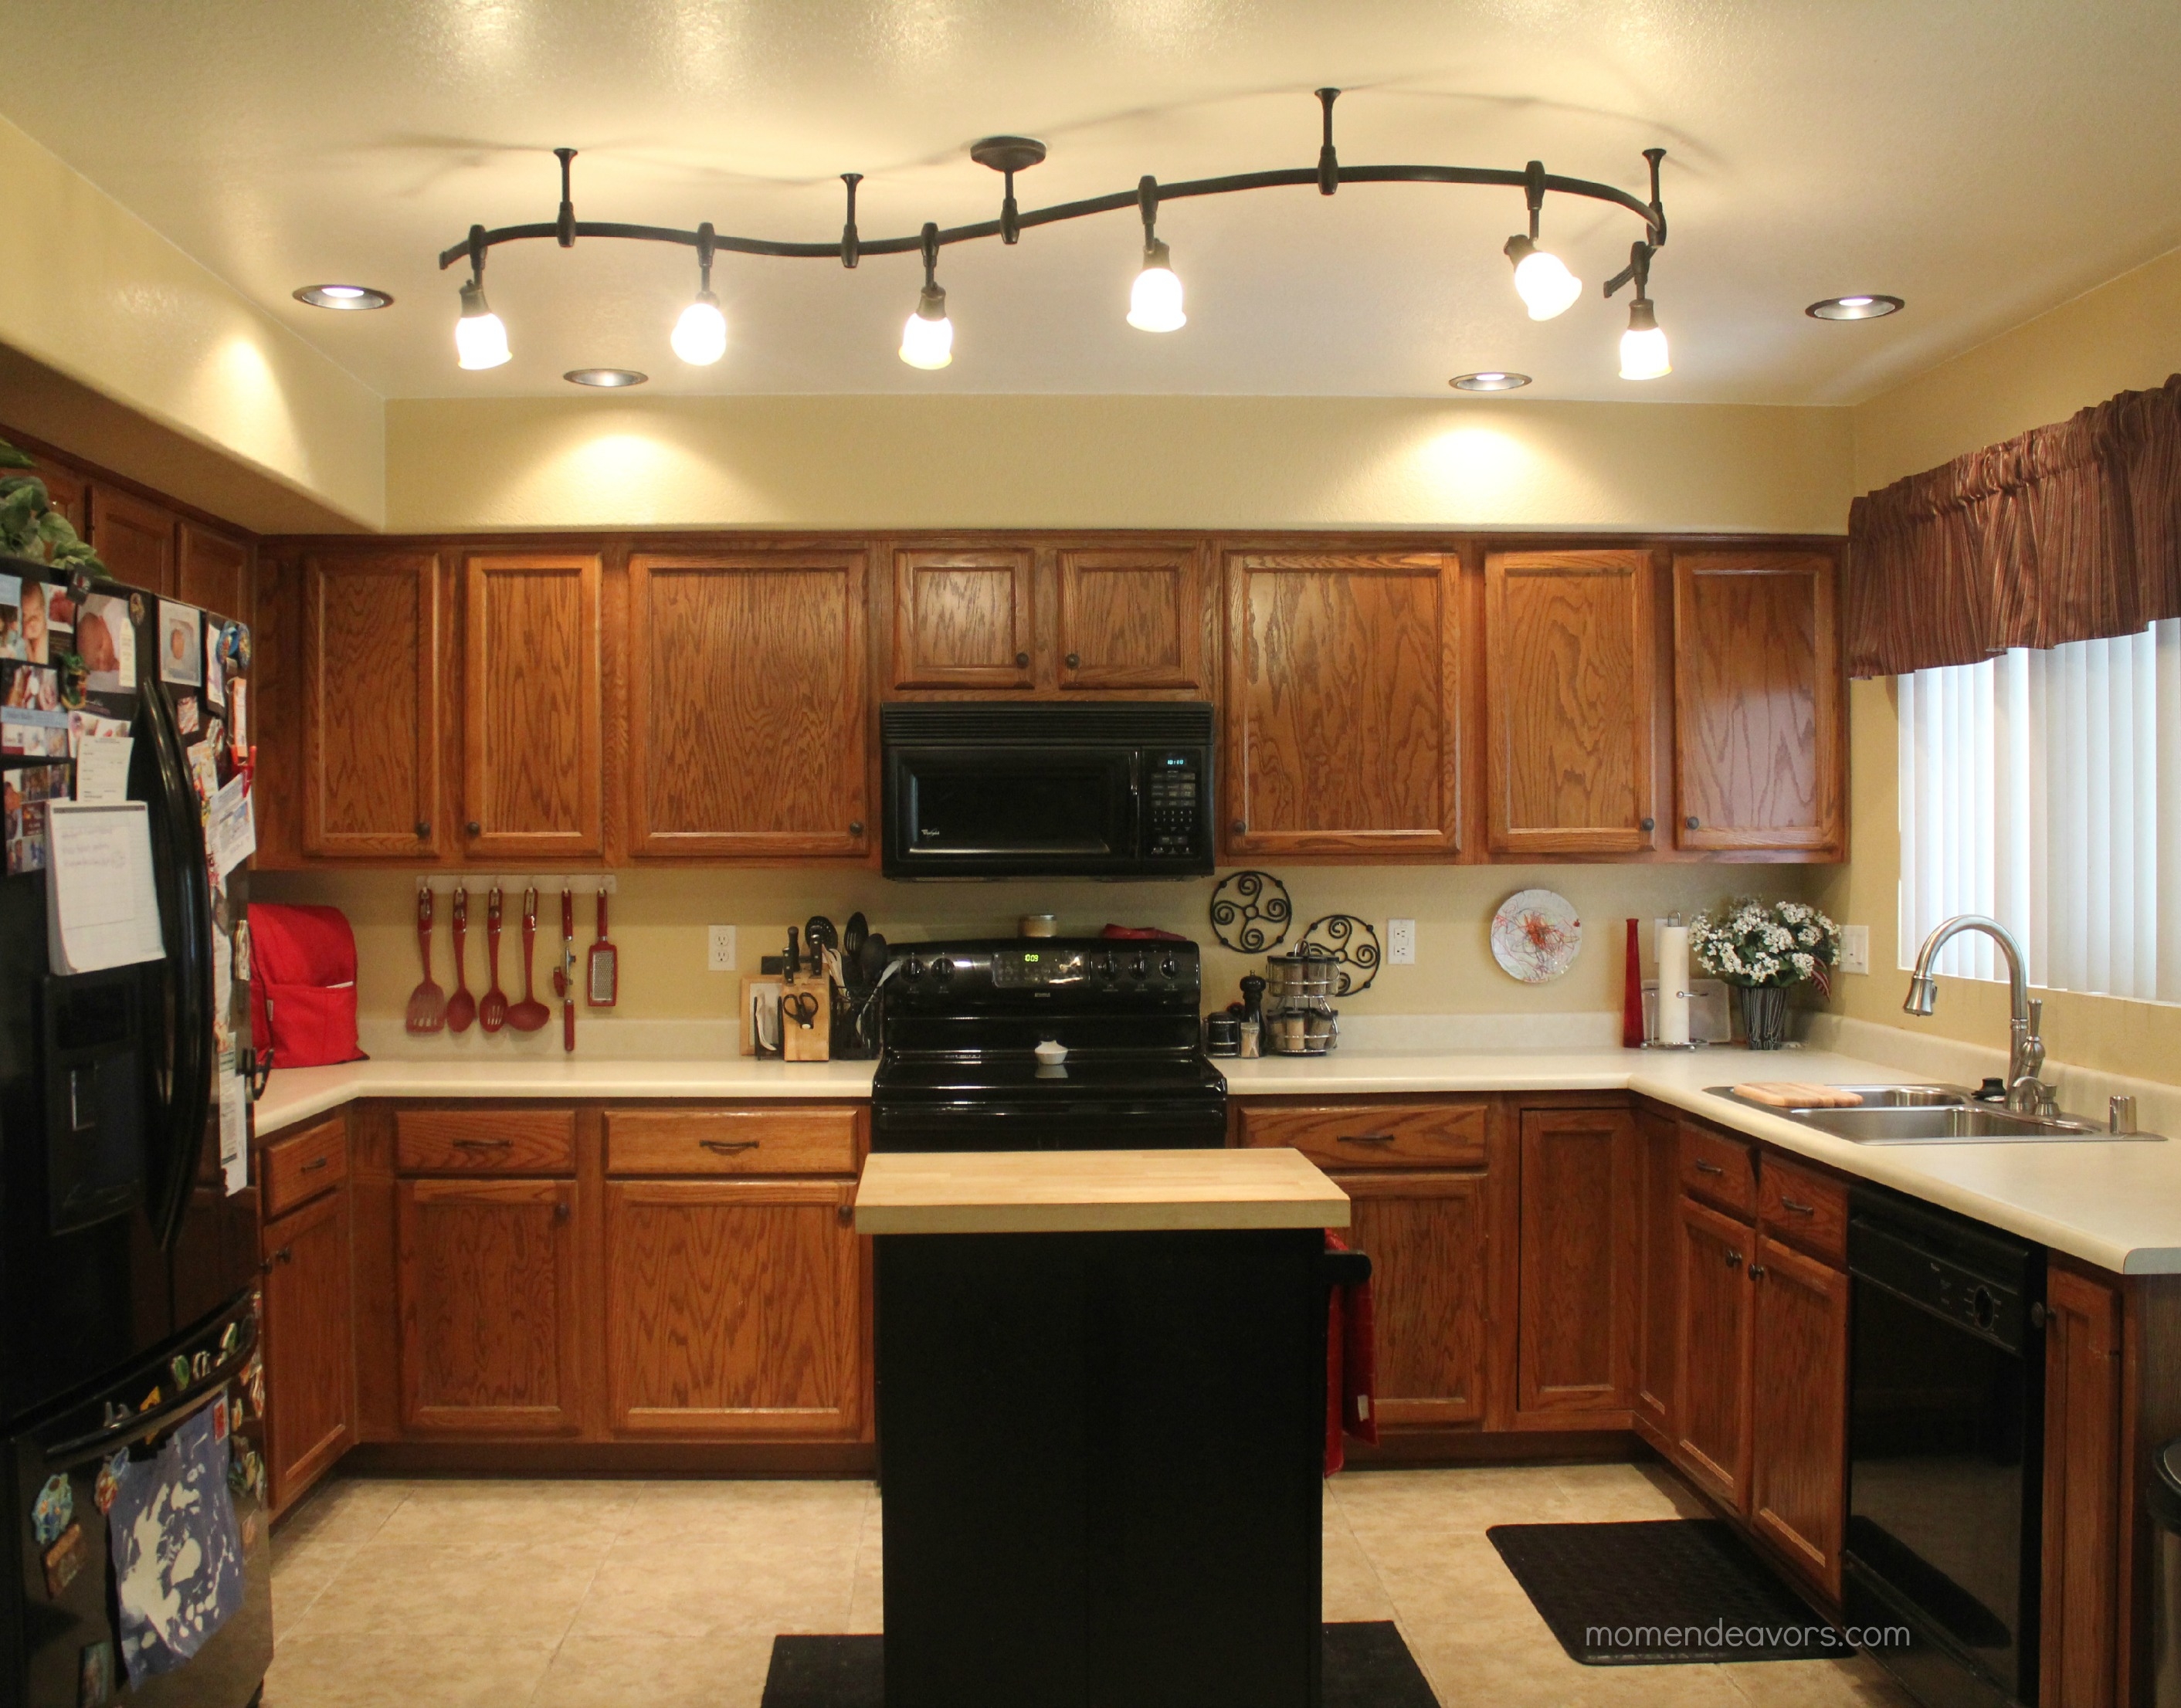 Best Lights For Kitchen Ceilings